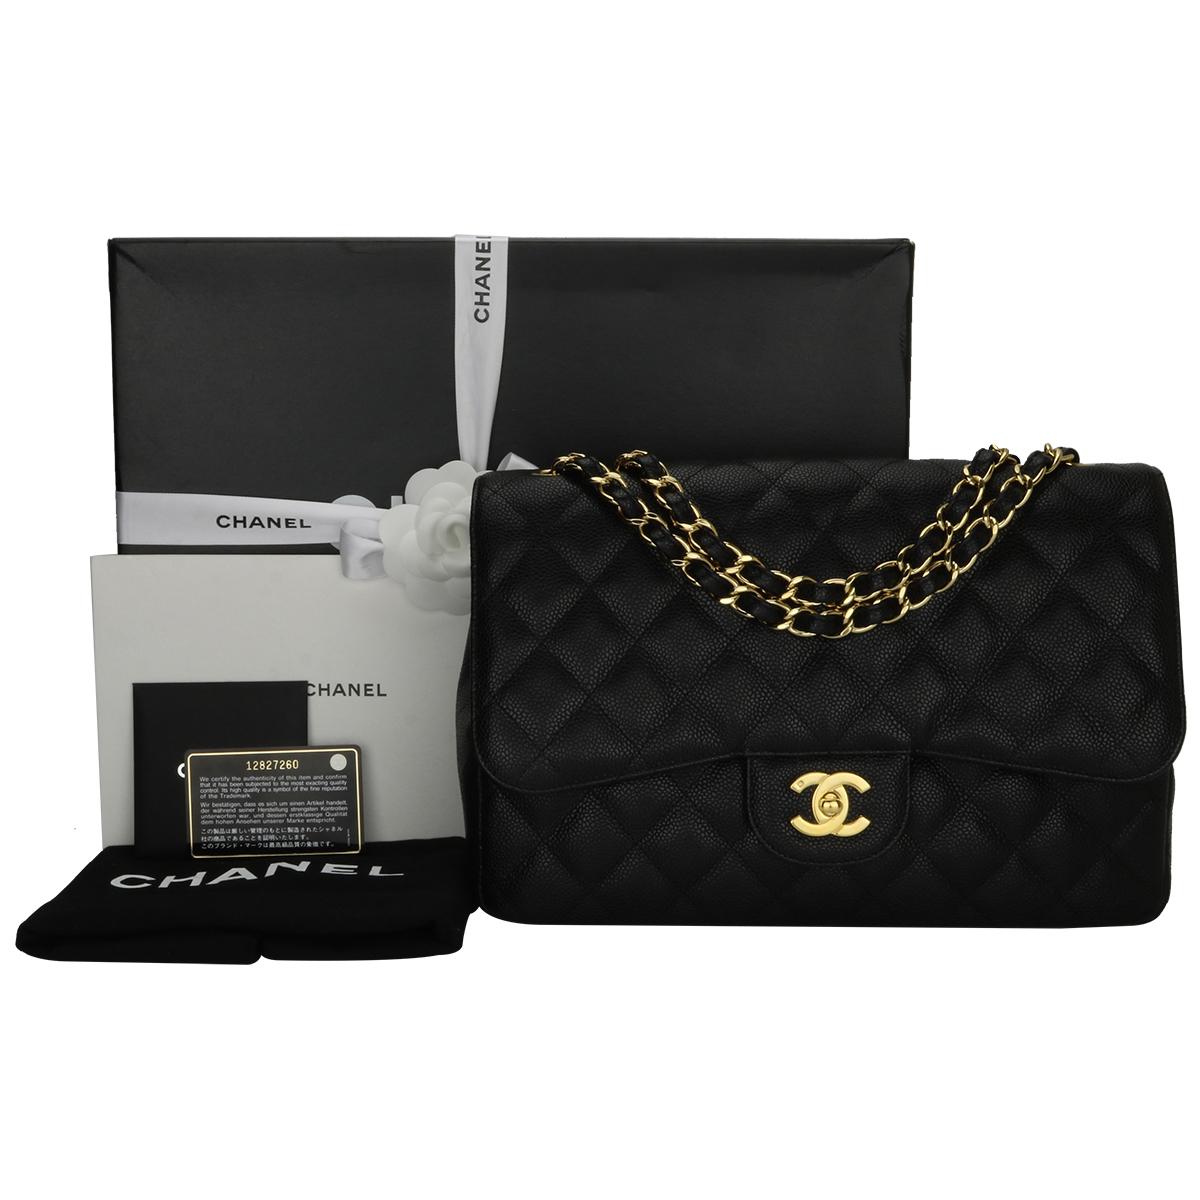 Authentic CHANEL Classic Single Flap Jumbo Black Caviar with Gold Hardware 2008.

This stunning bag is in mint condition, the bag still holds its original shape and the hardware is still very shiny.

Exterior Condition: Mint condition, corners show